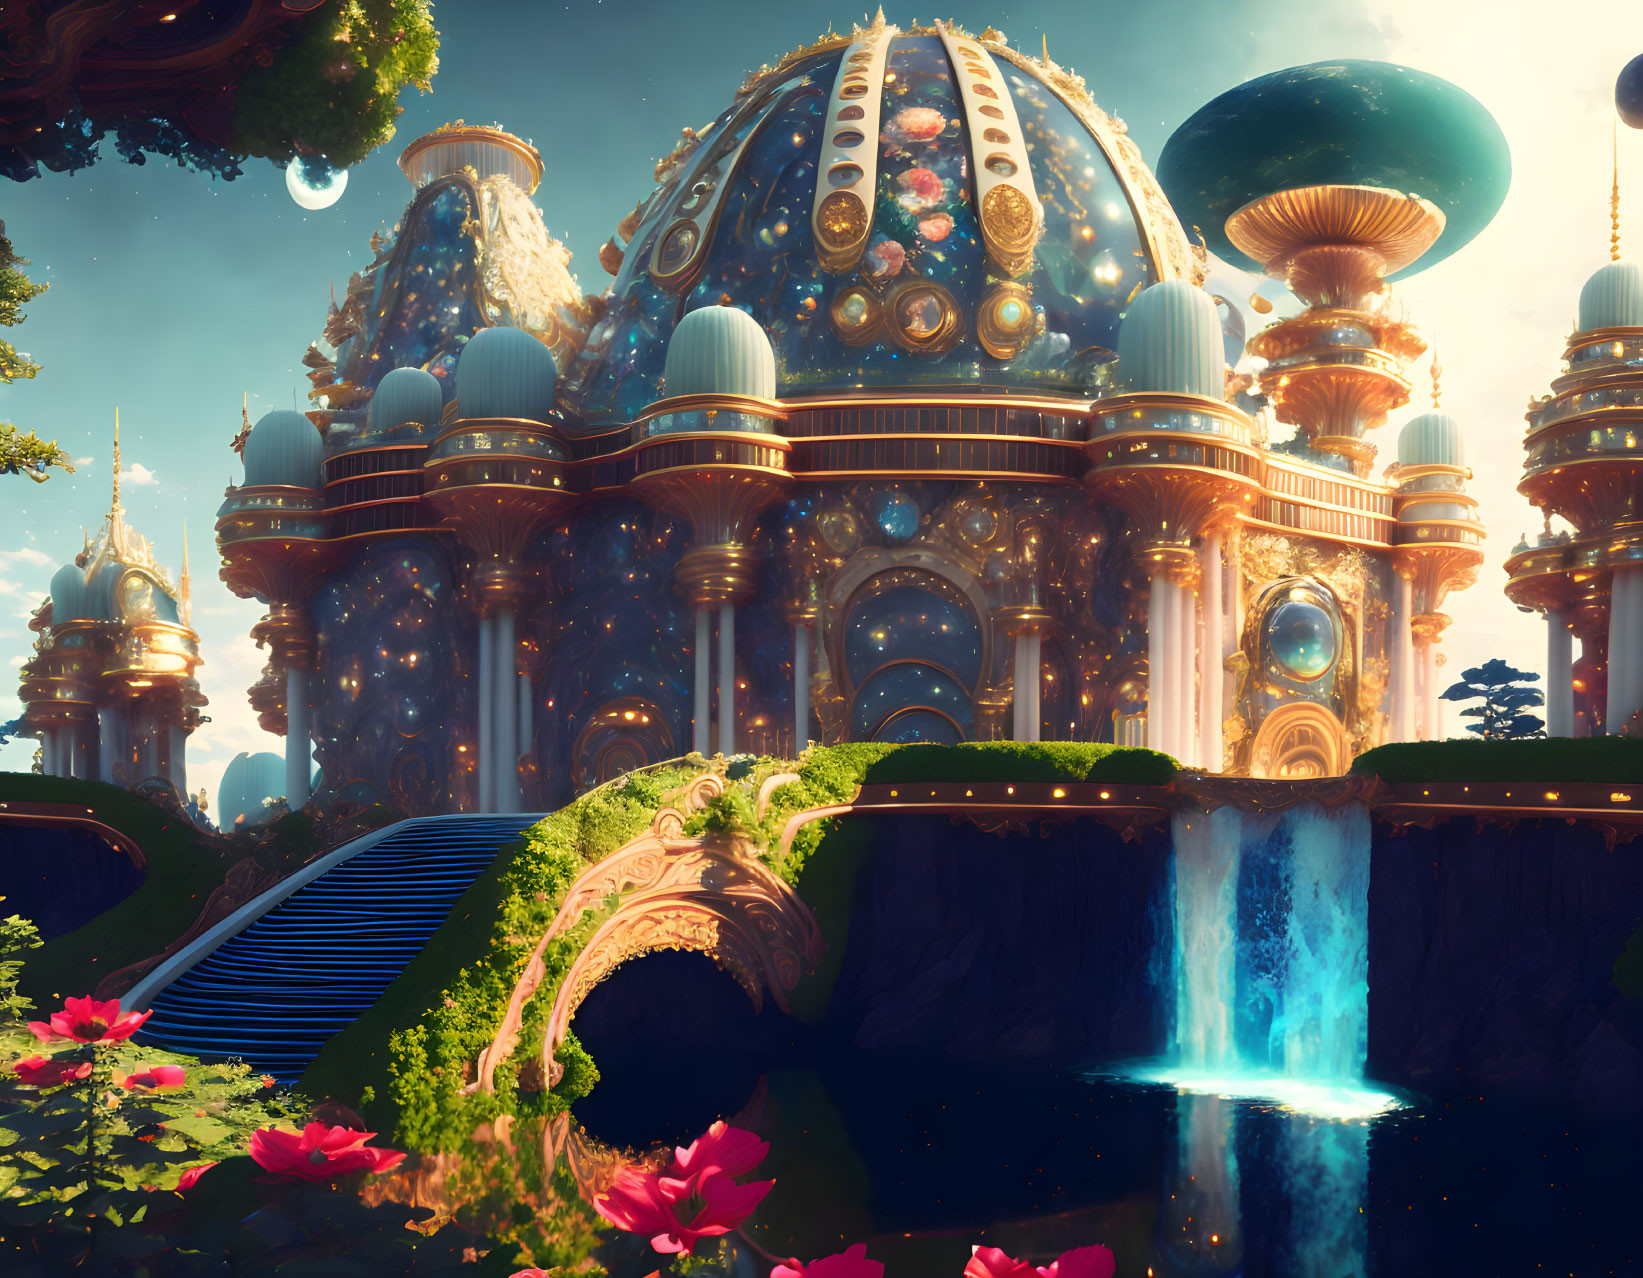 Futuristic golden-domed palace in lush greenery with waterfalls